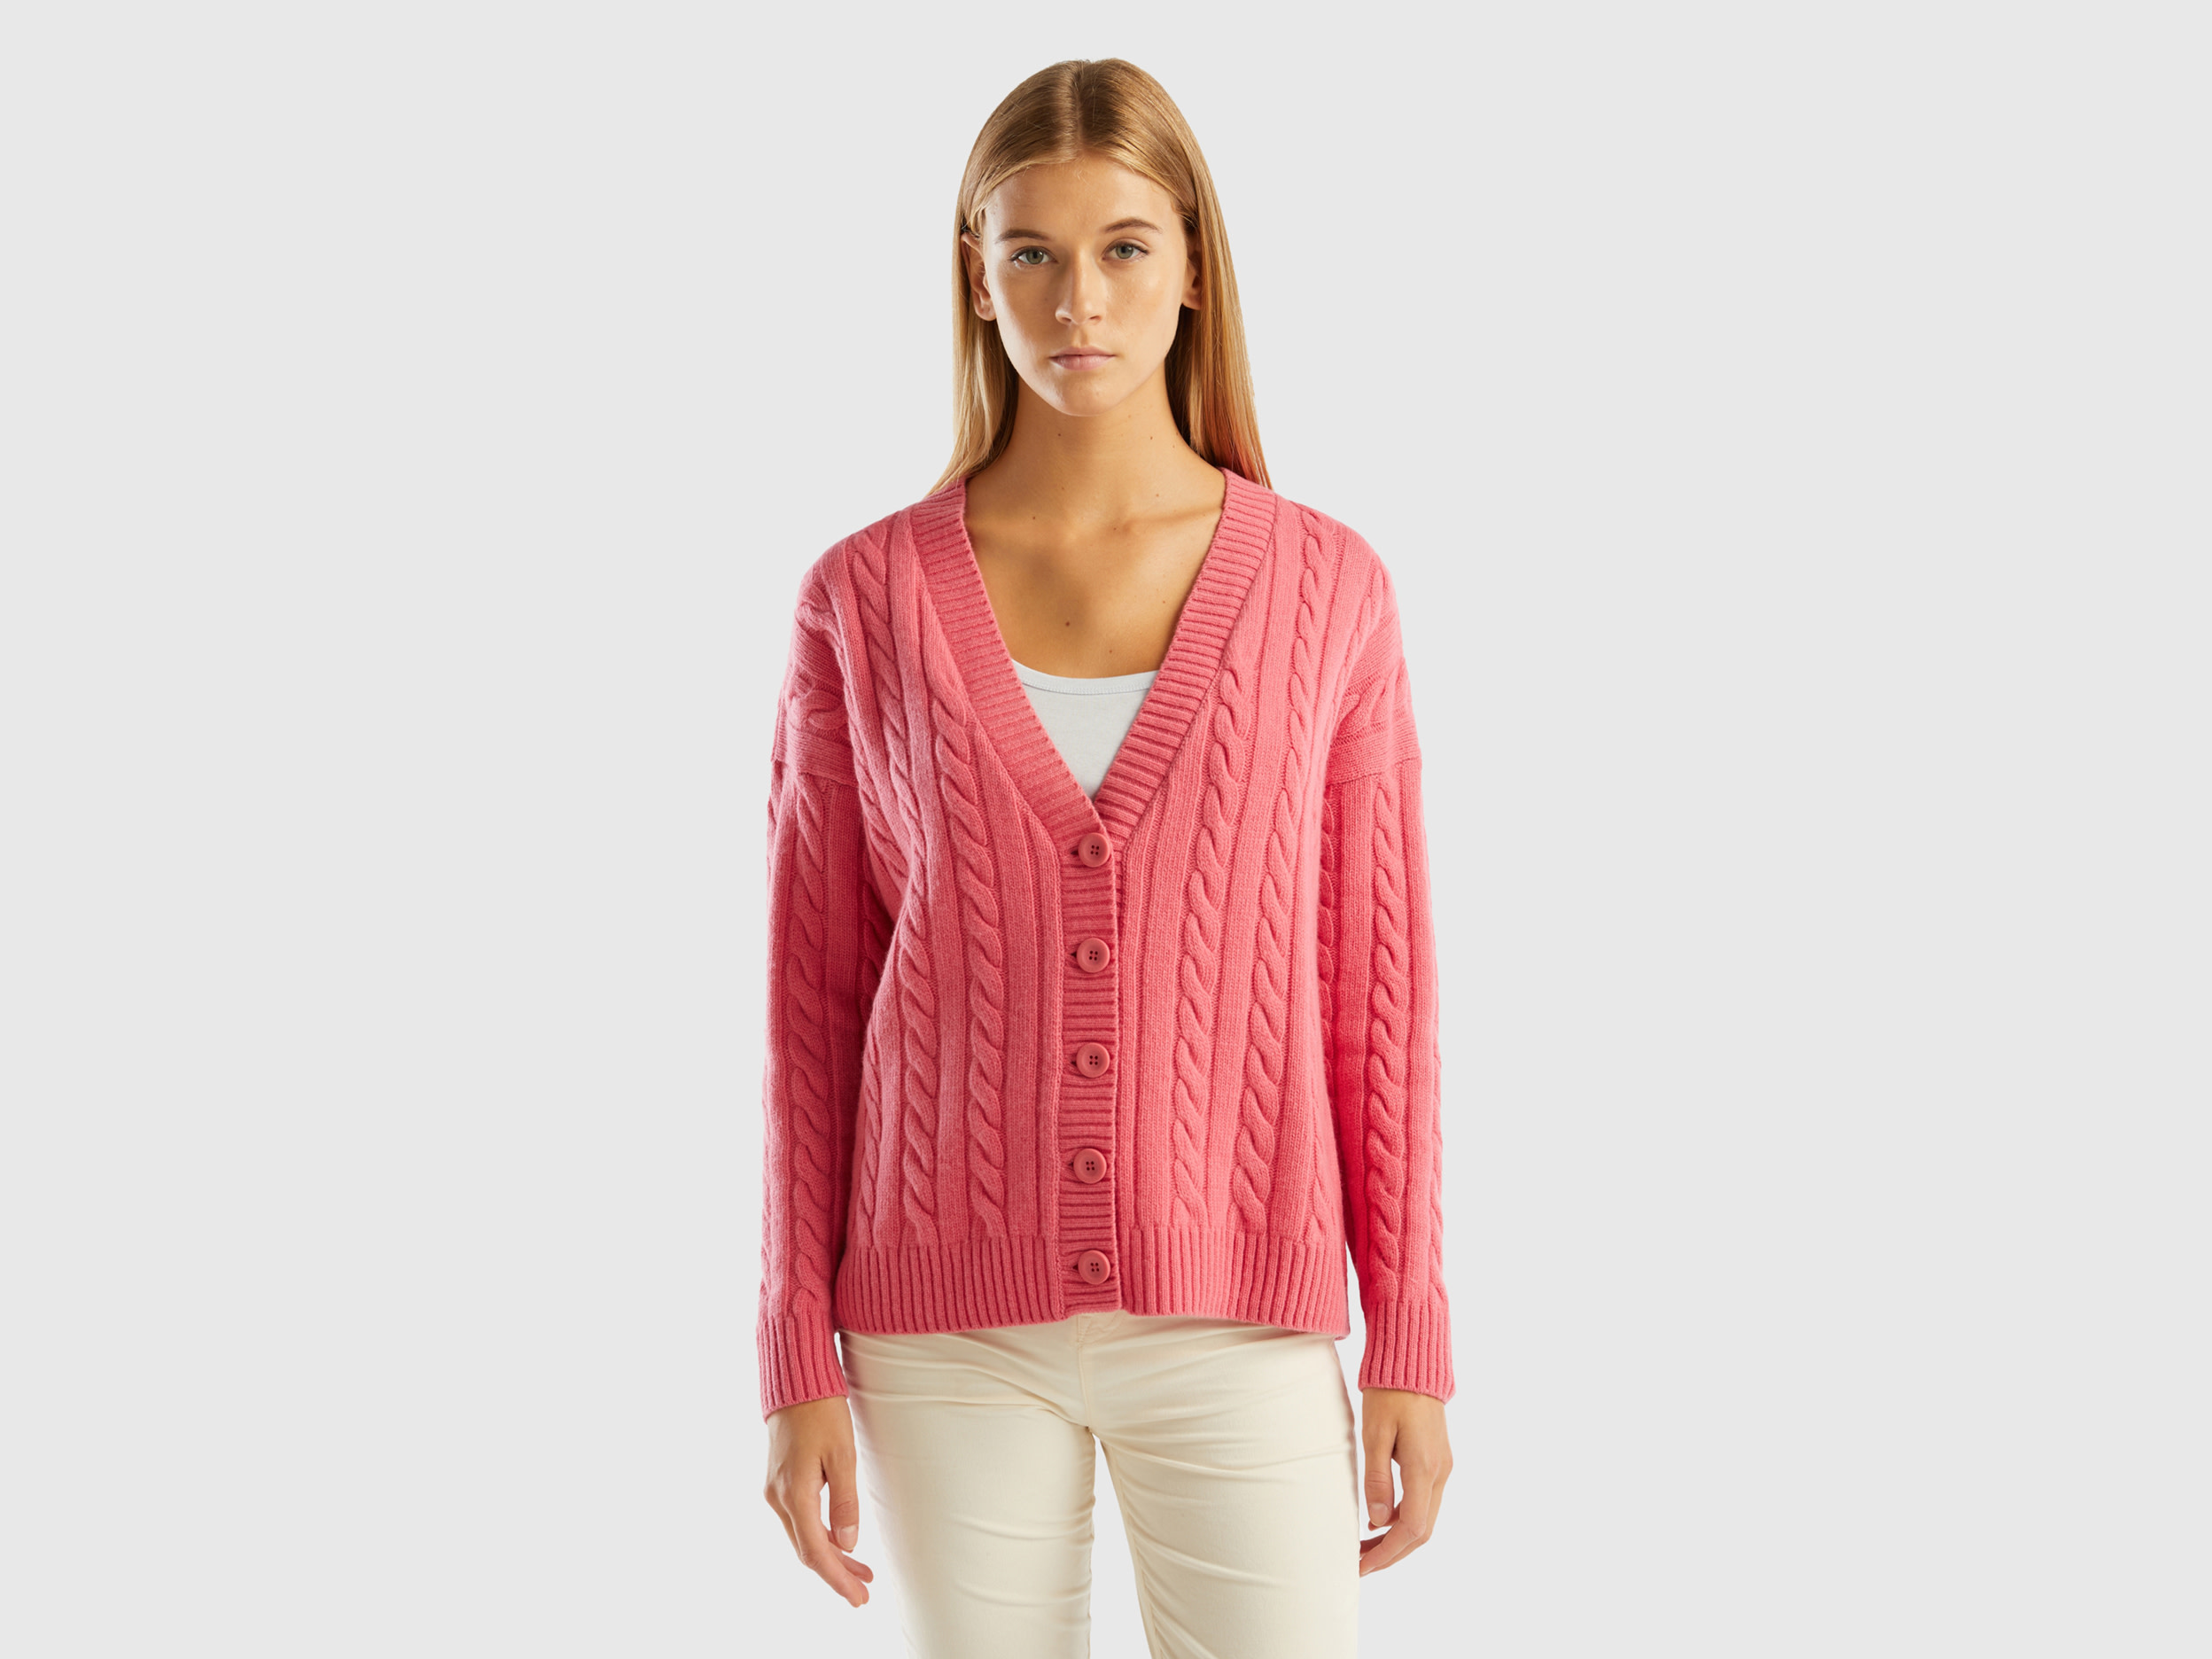 Benetton, Oversized Fit Cardigan With Cables, size XS-S, Pink, Women